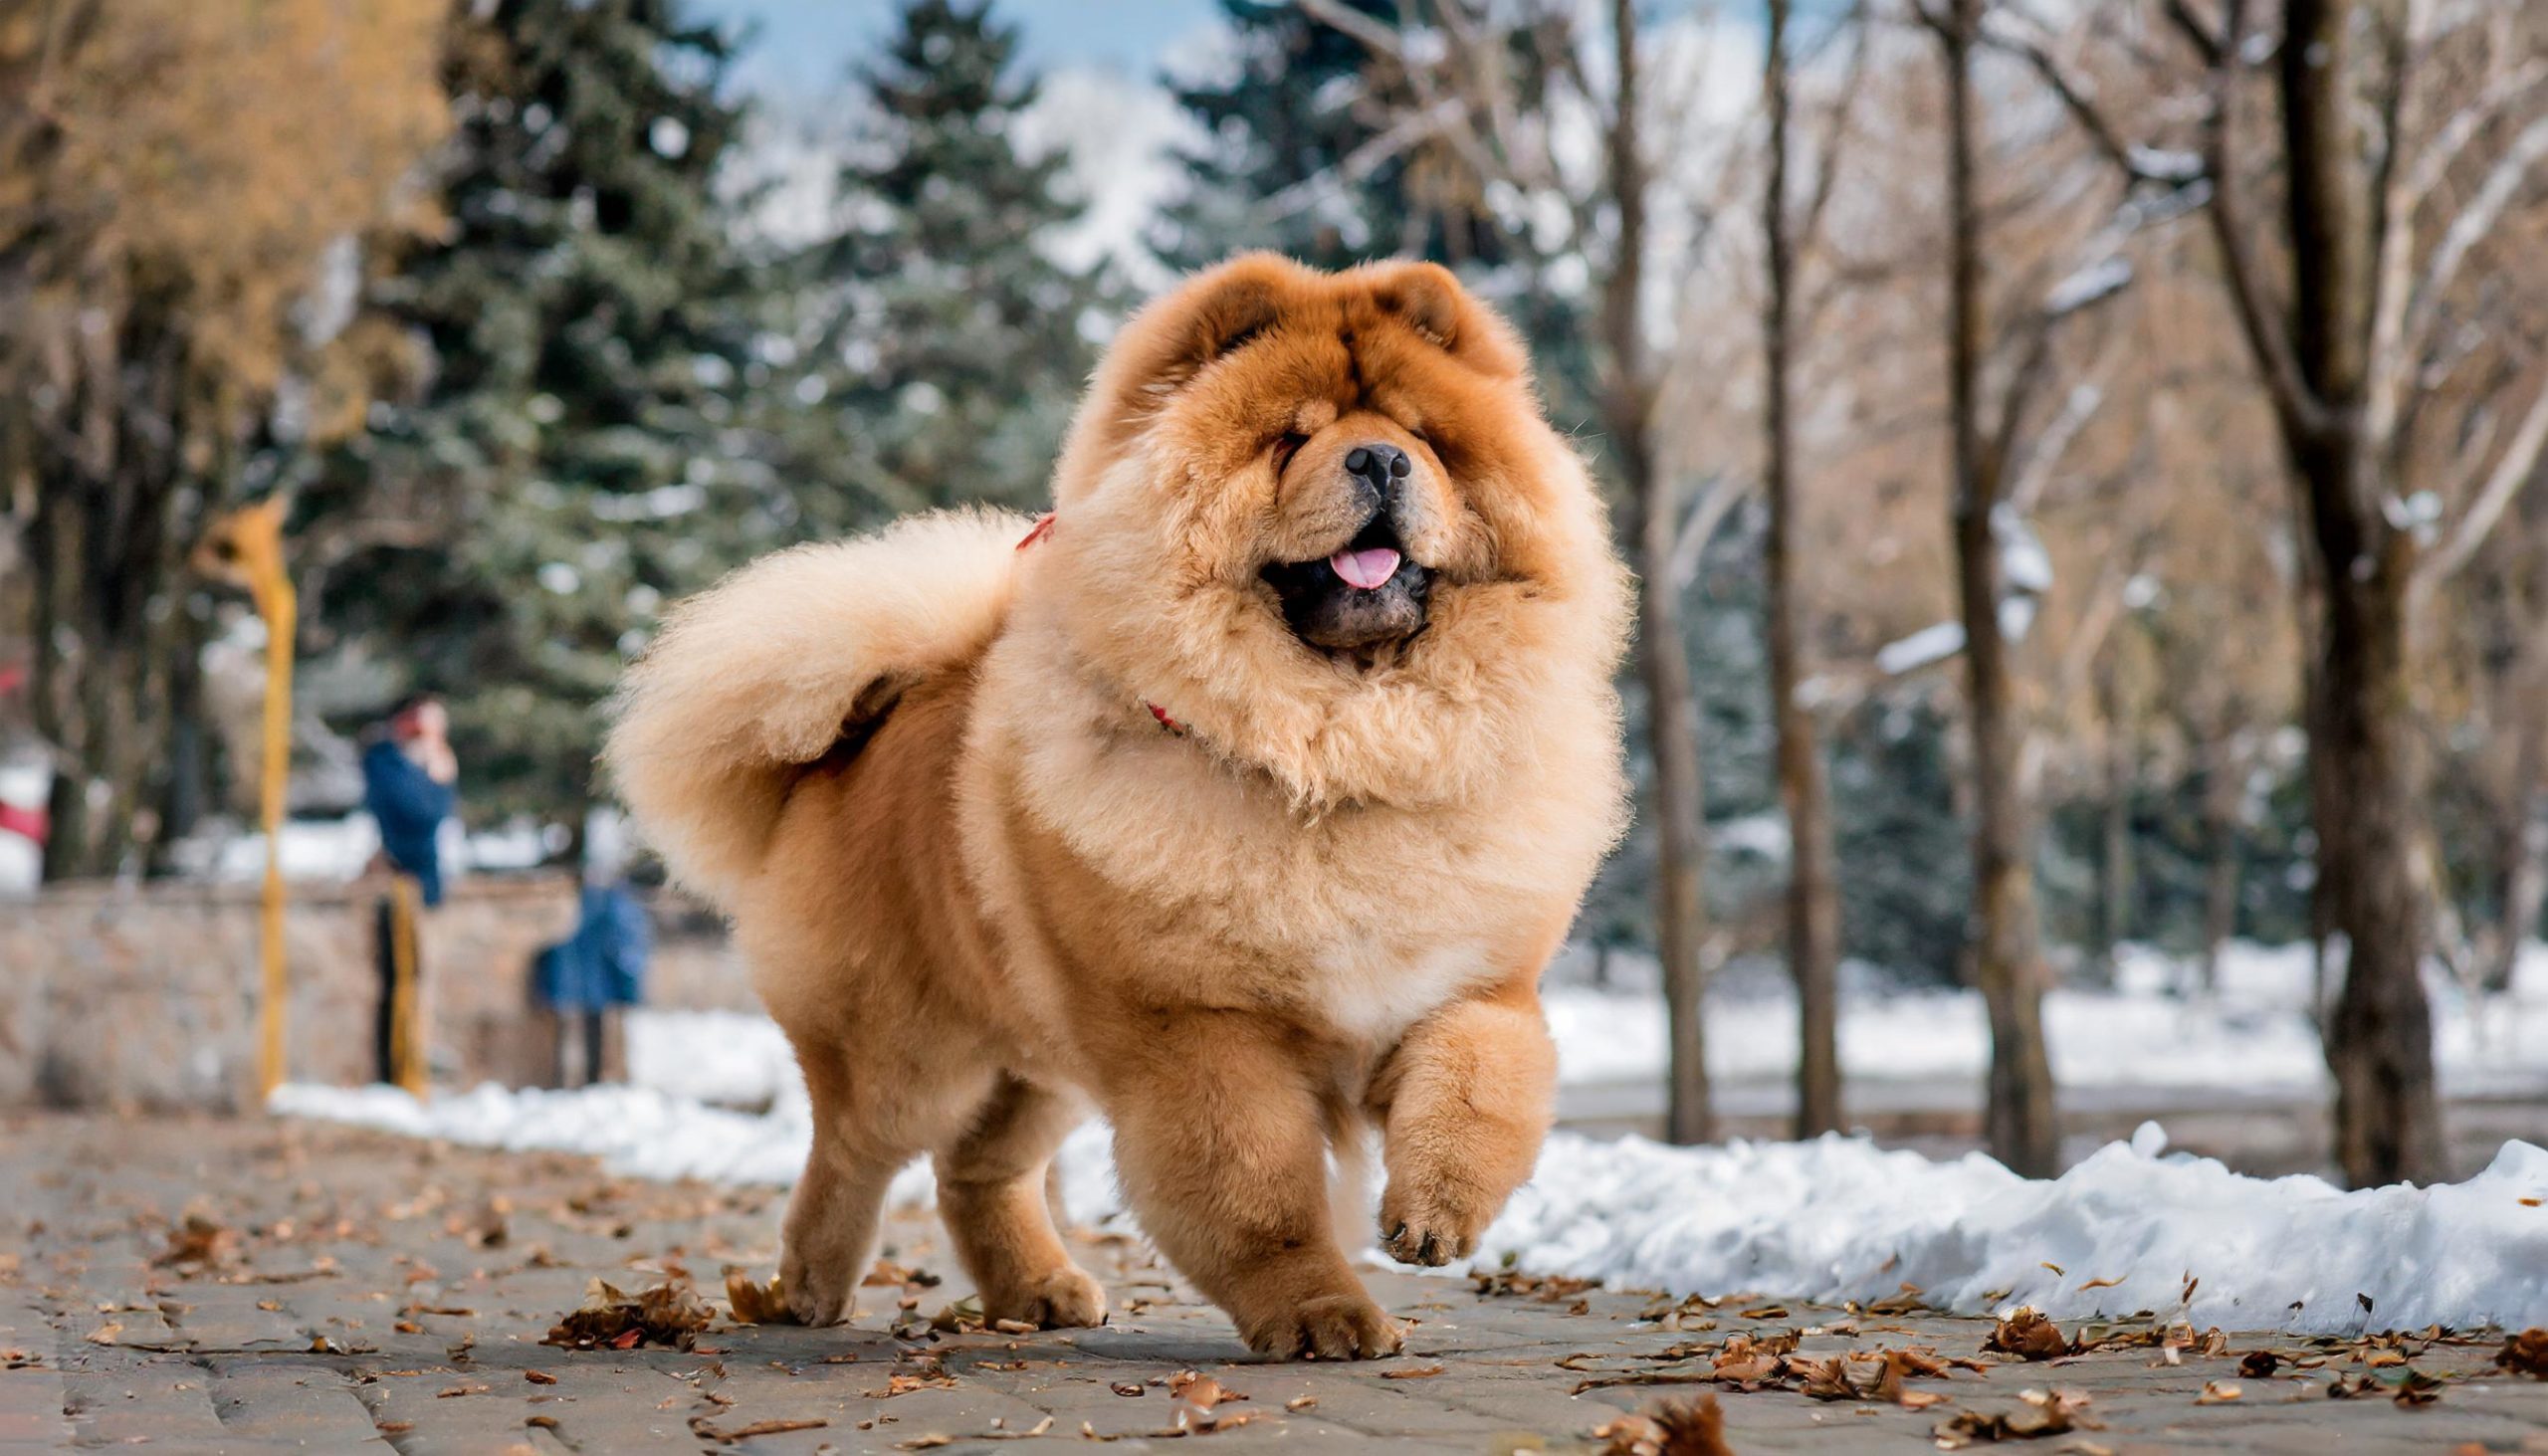 the chow chow during a photoshoot in the park